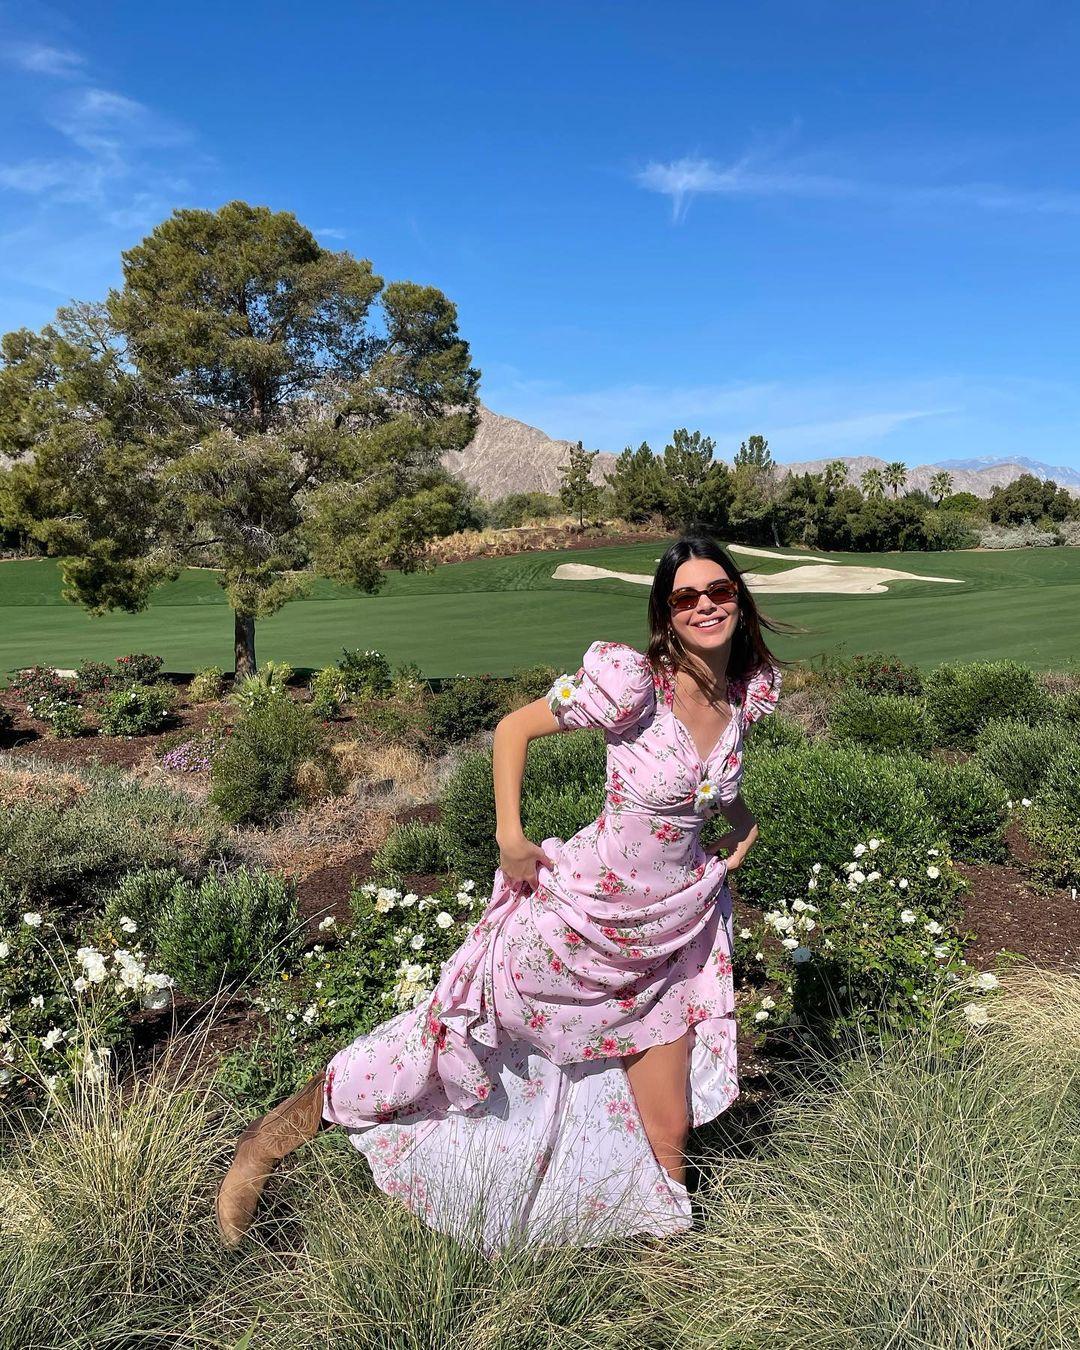 Kendall Jenner's summer dress is quite iconic. The dress featured a gorgeous flower print, puffed sleeves and beautiful 3D daisy details